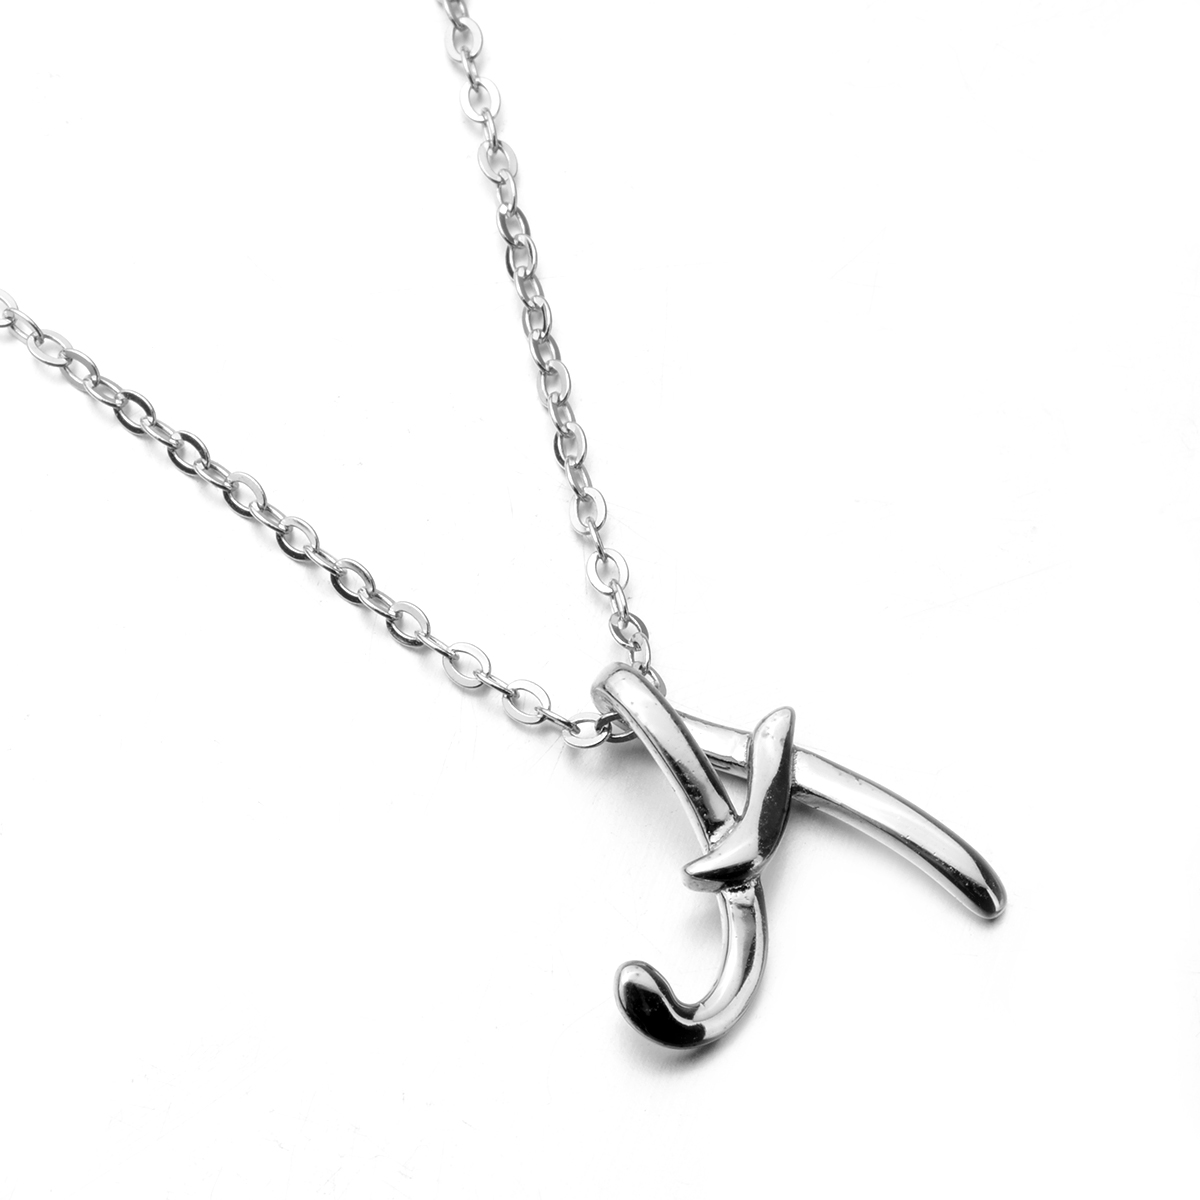 Fashion Jewelry Letter A Shape 925 Sterling Sliver Rhodium Plated Necklace Pendants